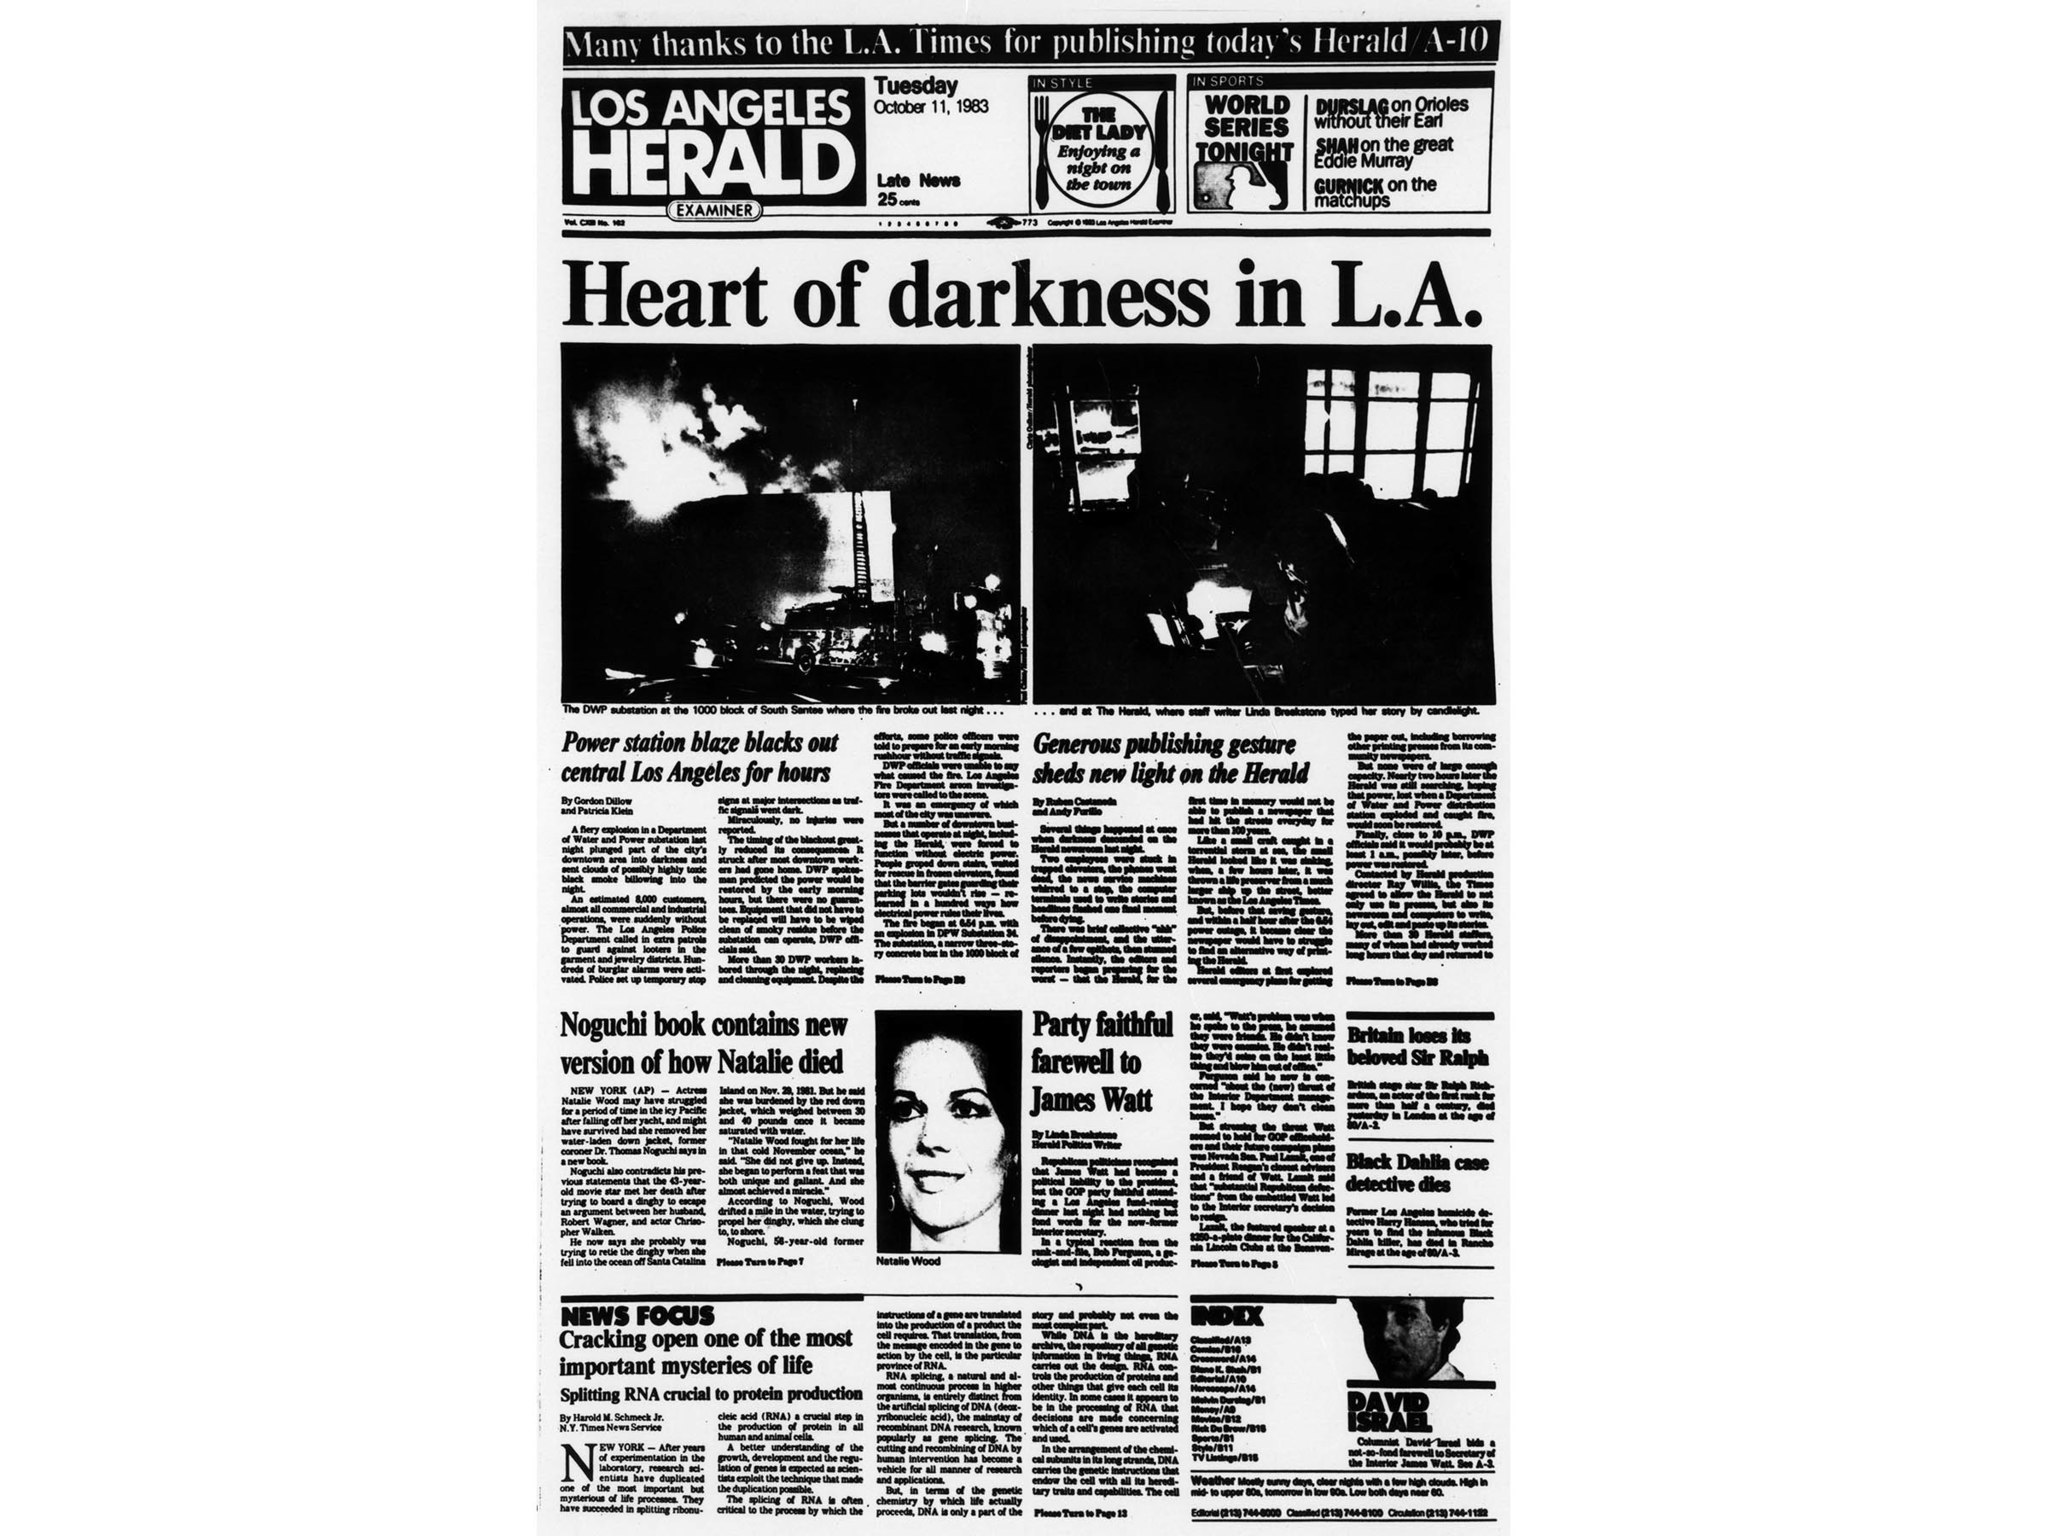 Oct. 11, 1983: Front page of the Oct. 11, 1983 Los Angeles Herald Examiner that was printed on the L